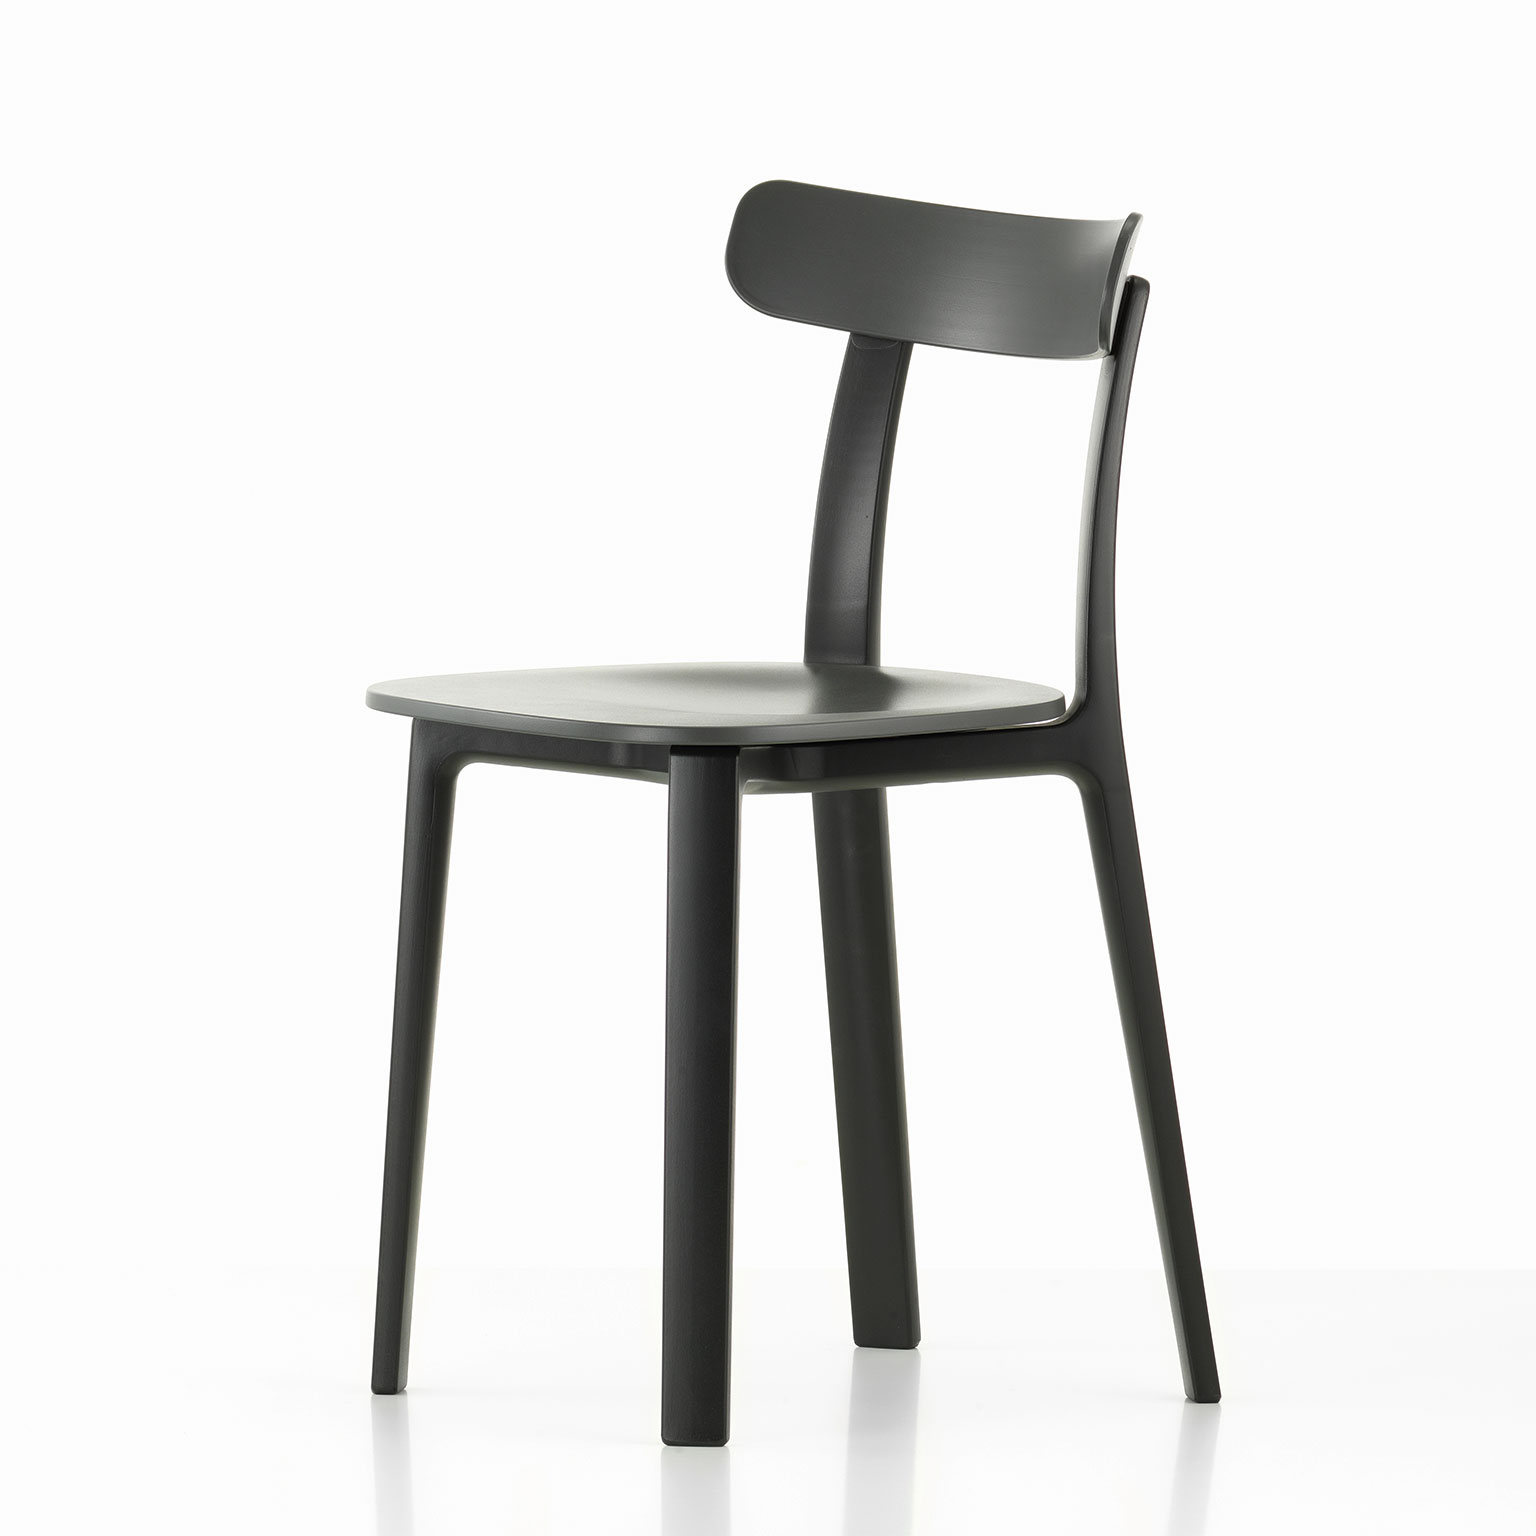 All Plastic Chair Graphite Grey two-tone[取寄せ商品]